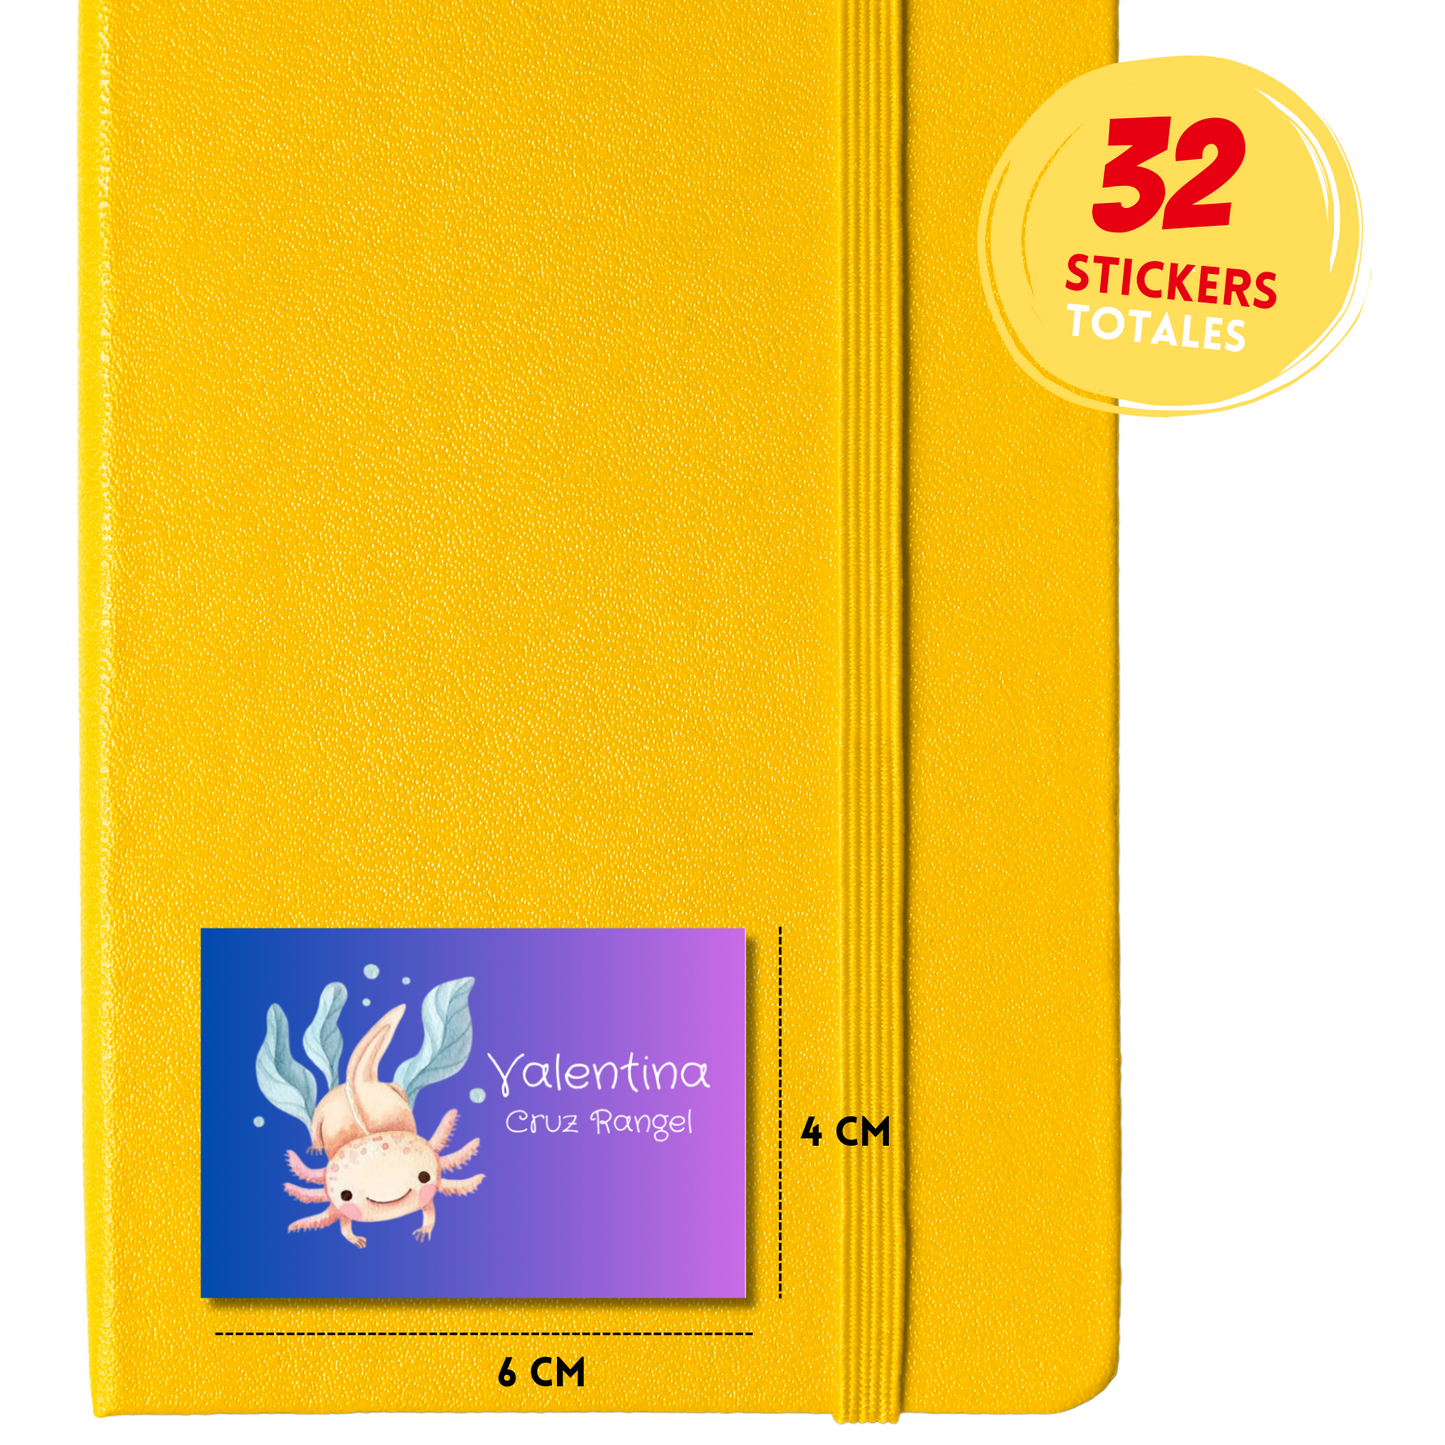 Ajolotito Swimming Personalized School Labels Notebooks, Books and Pencils 